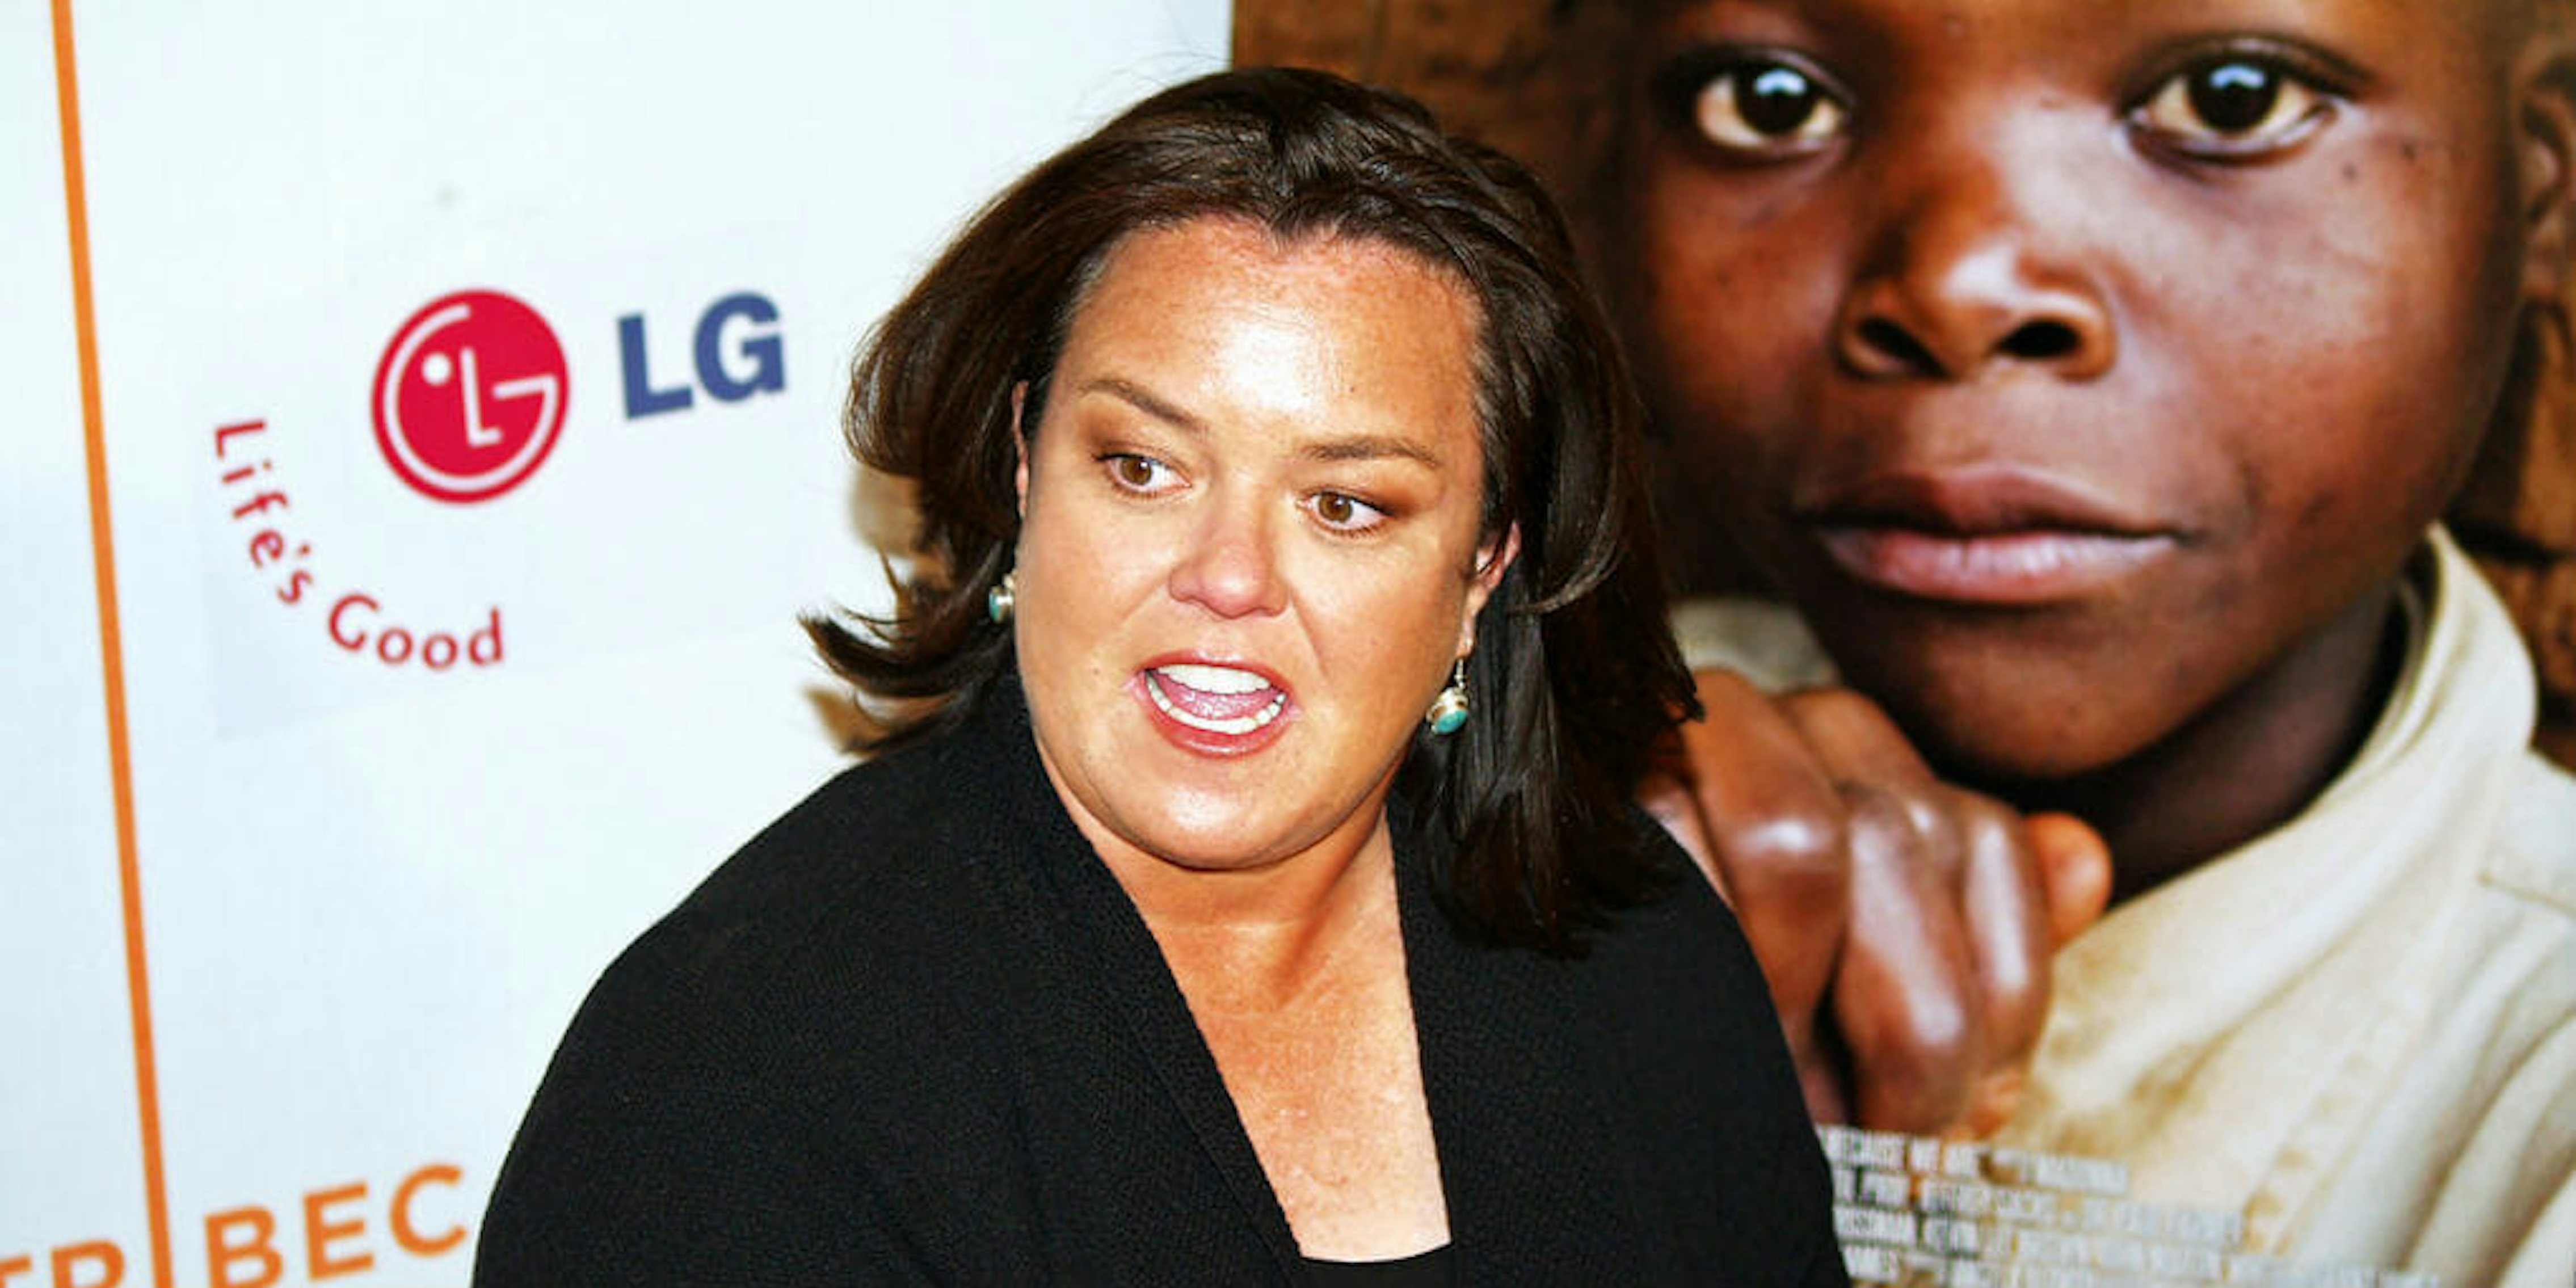 rosie o'donnell actress comedian